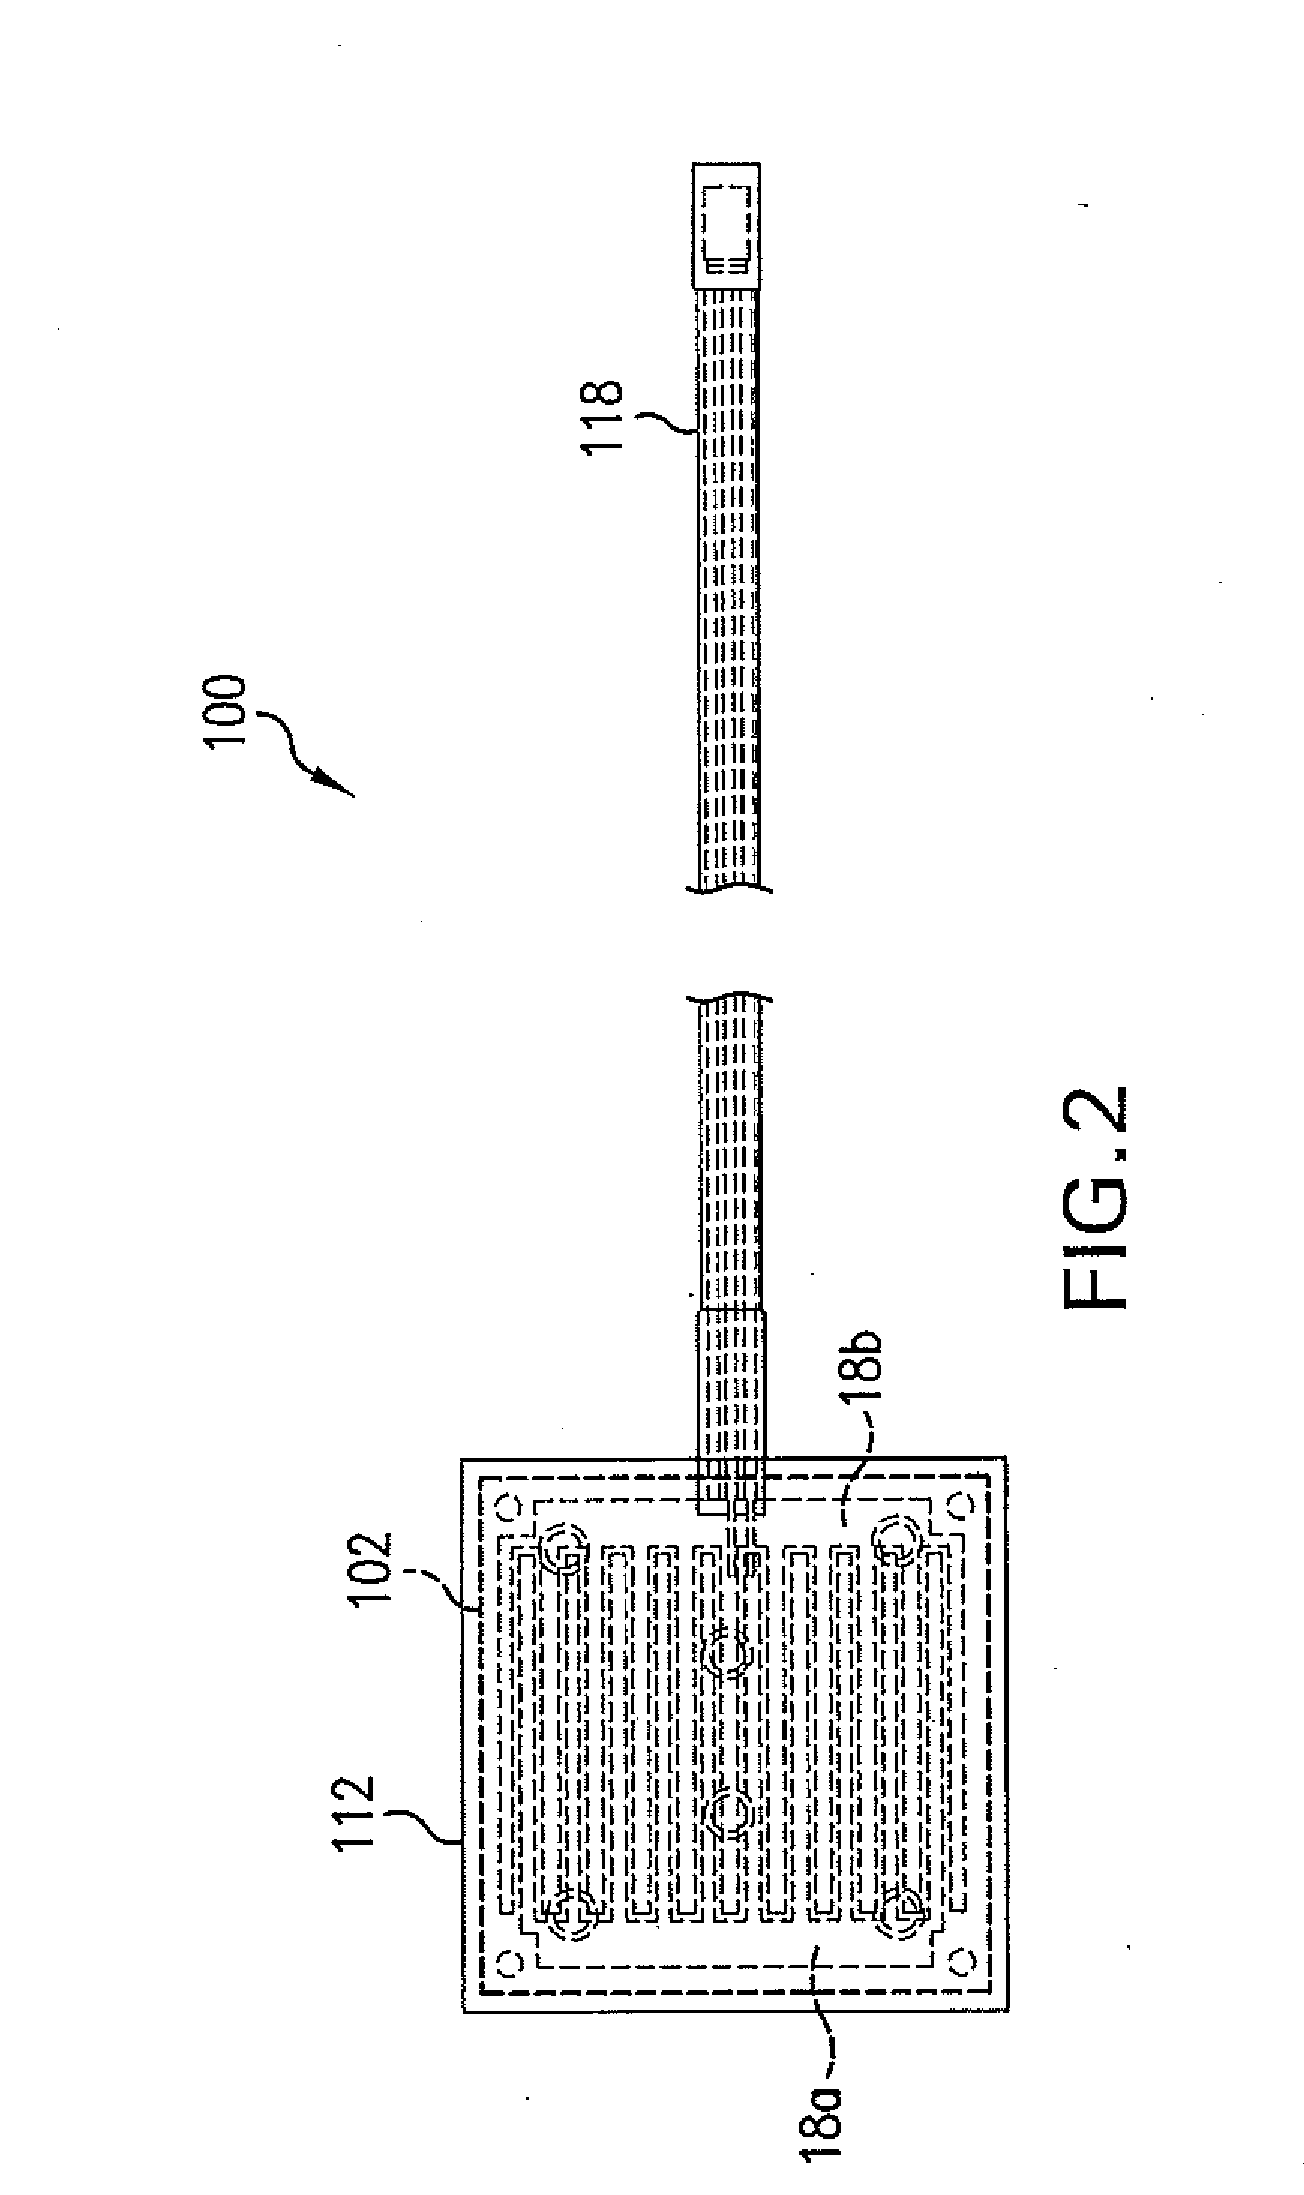 Integrated water detector